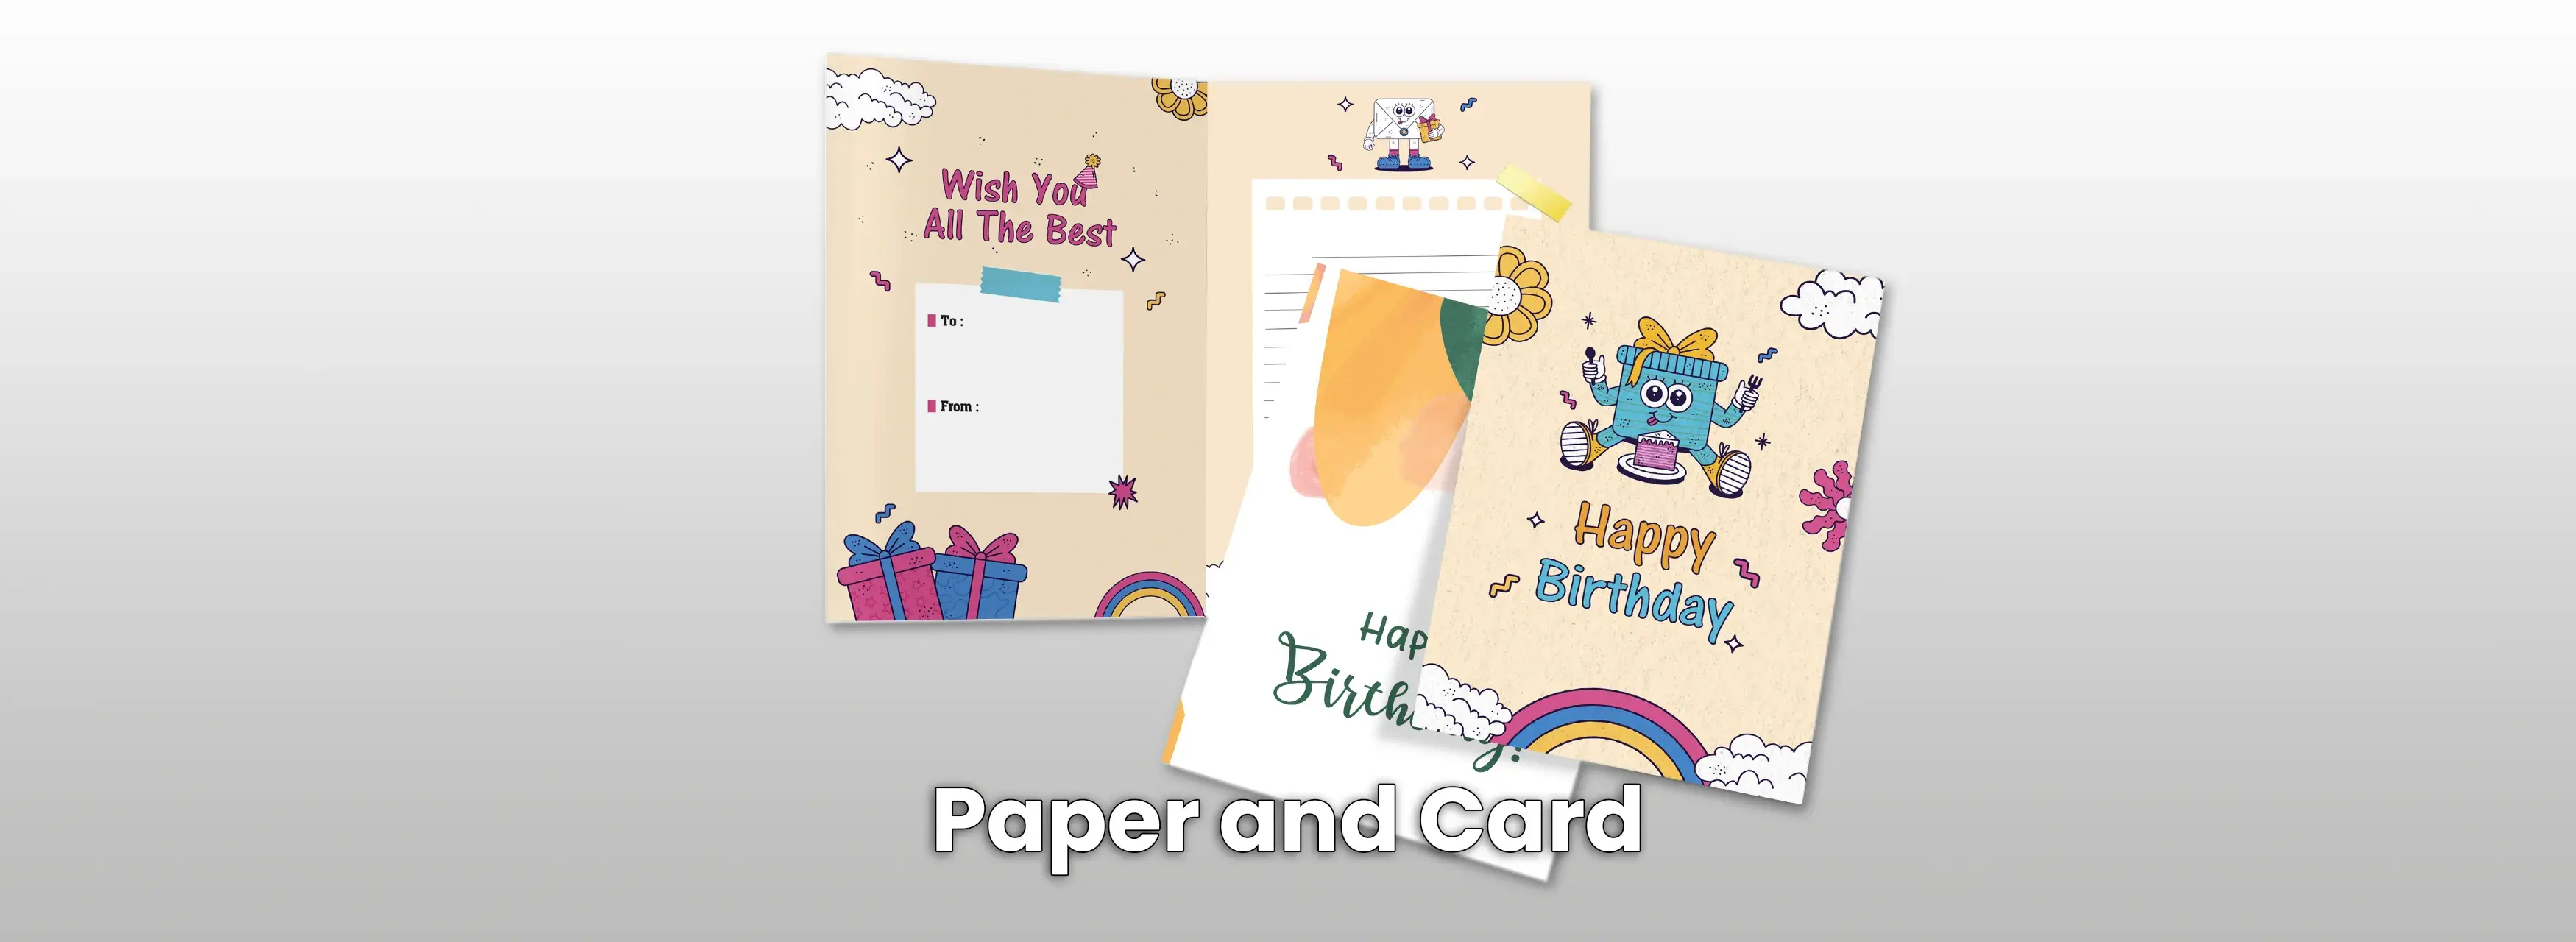 Paper and Card